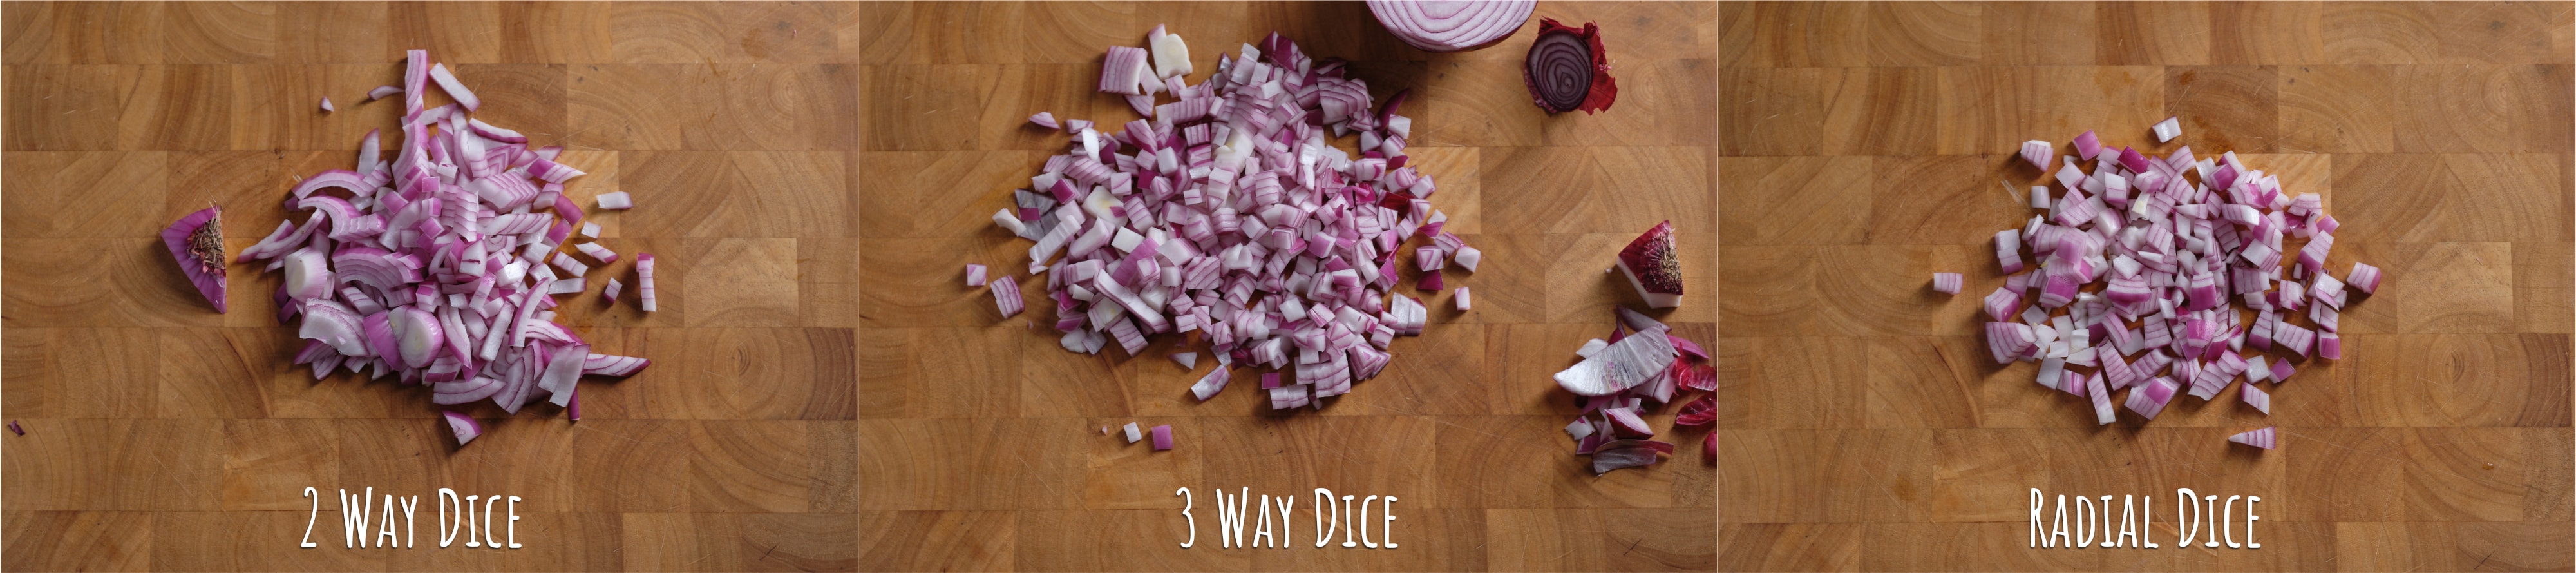 How To Dice An Onion